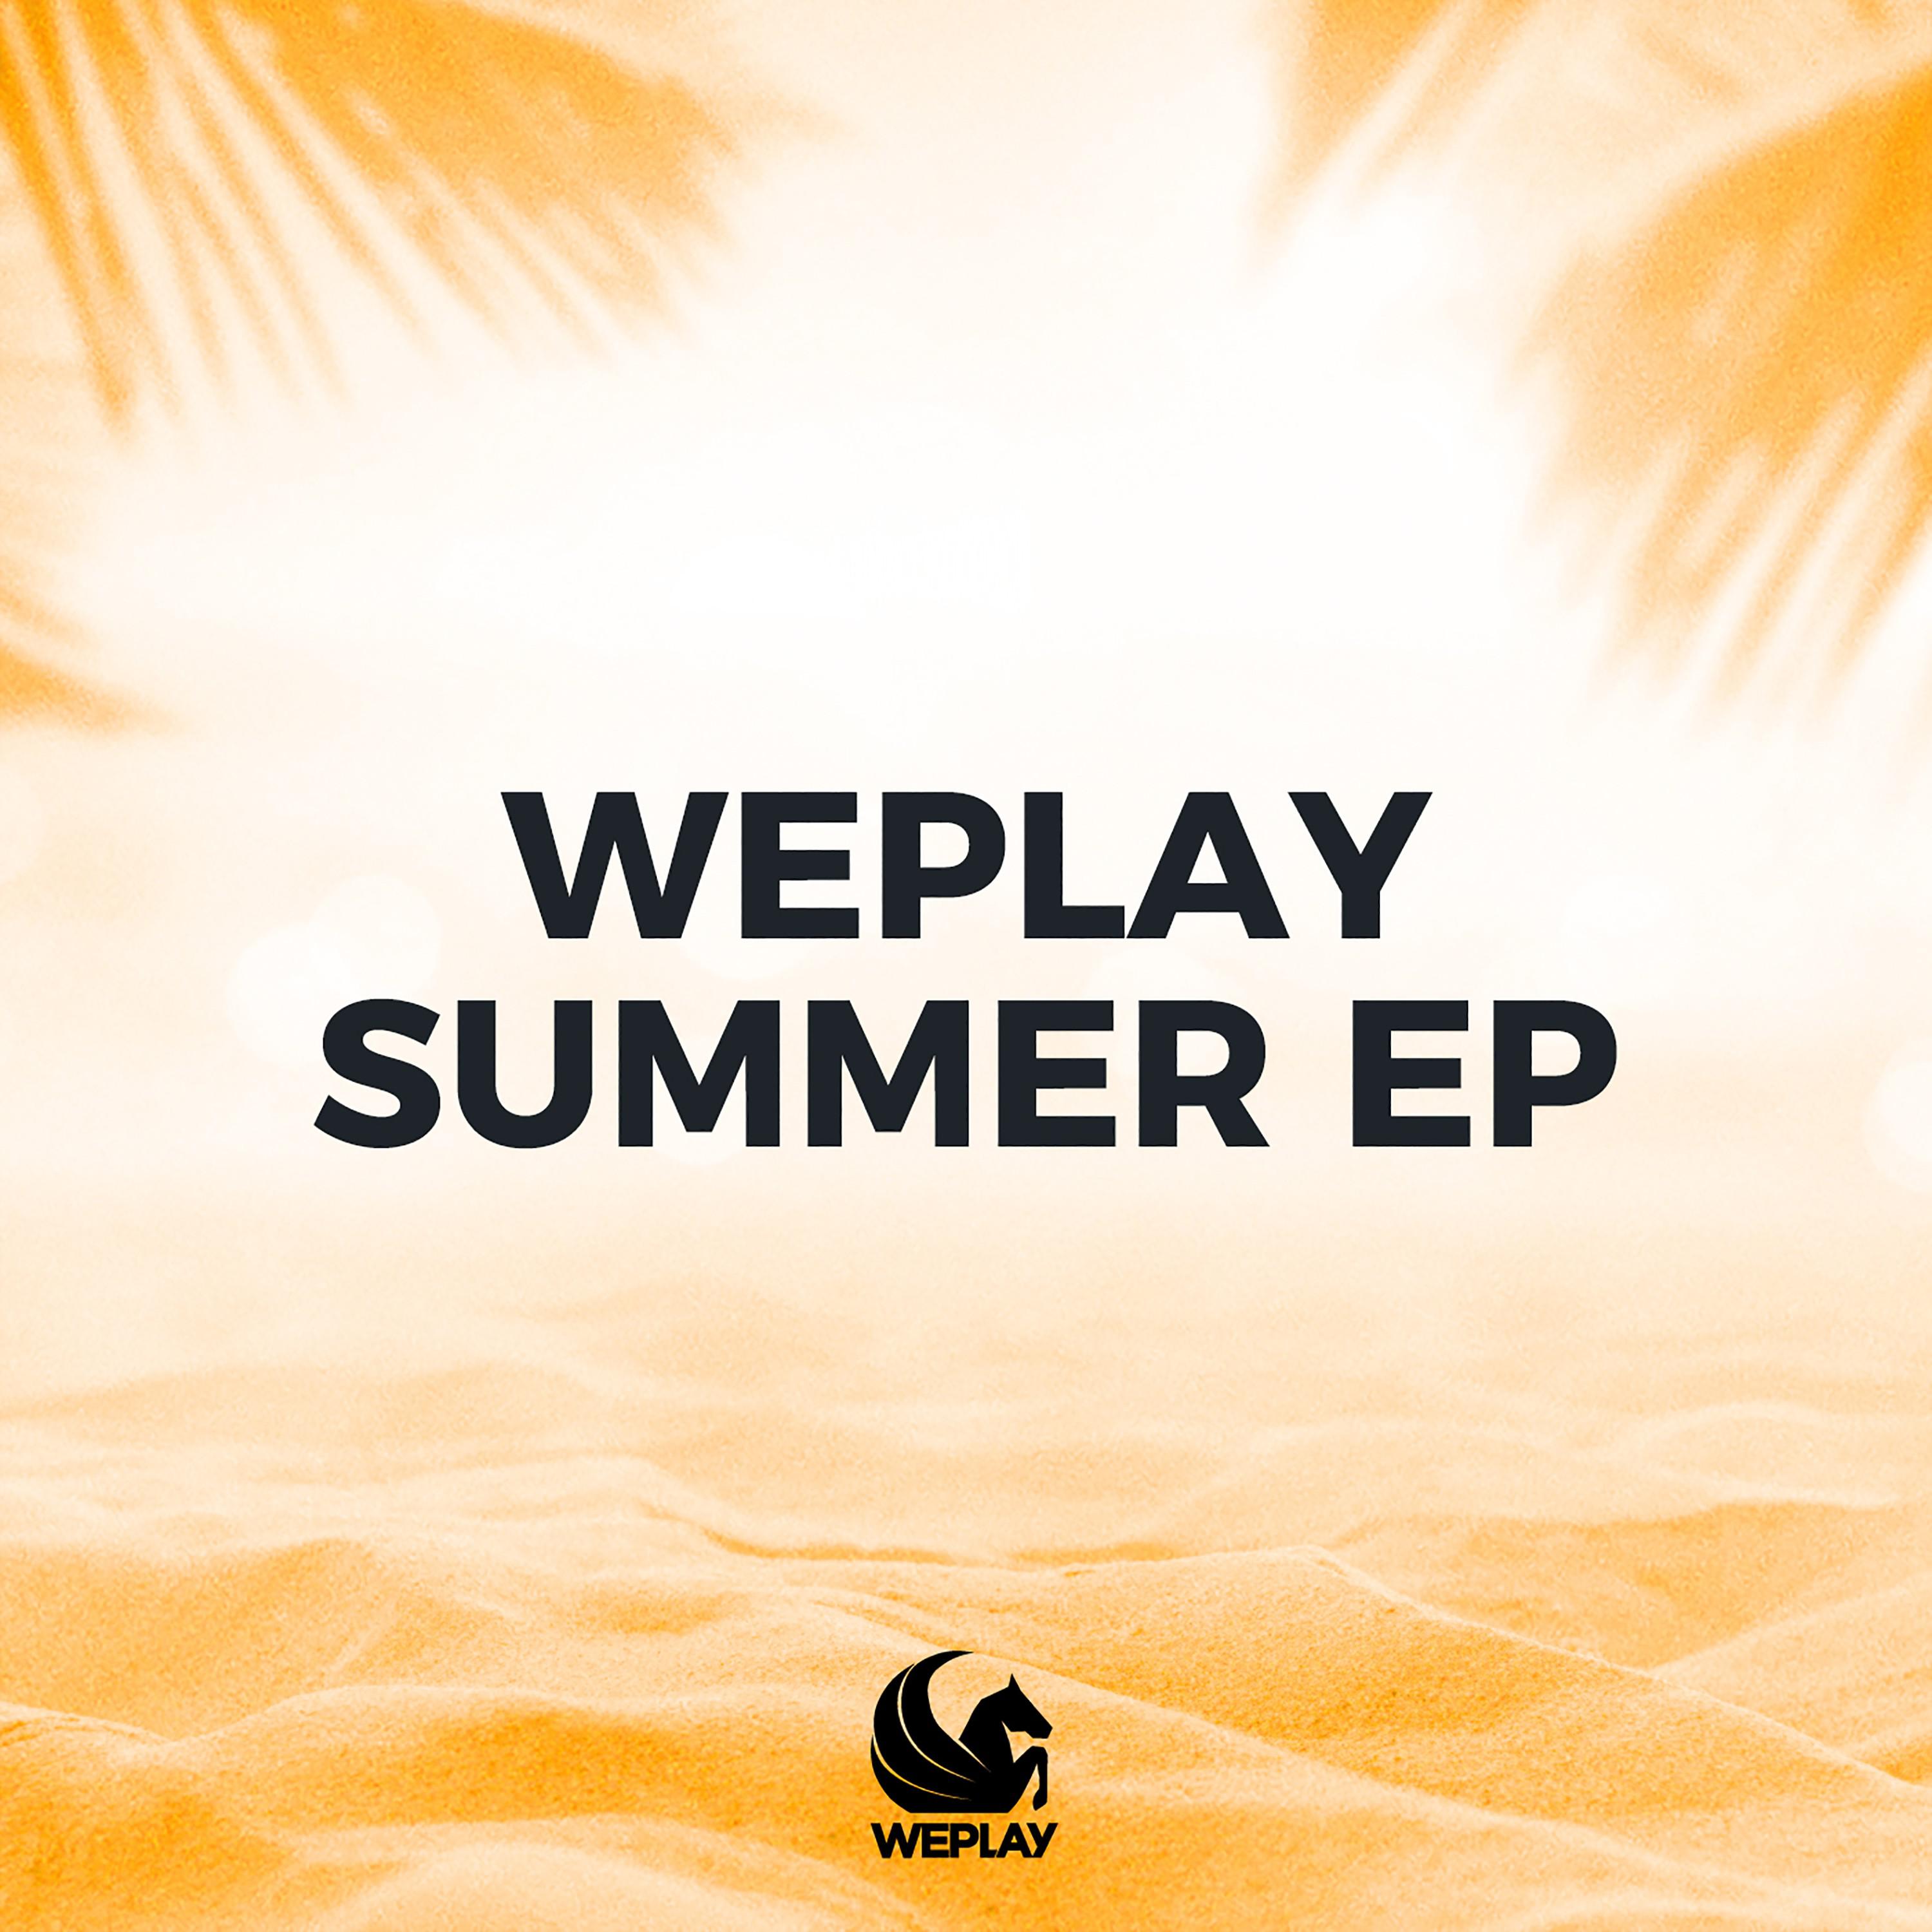 Weplay Summer EP